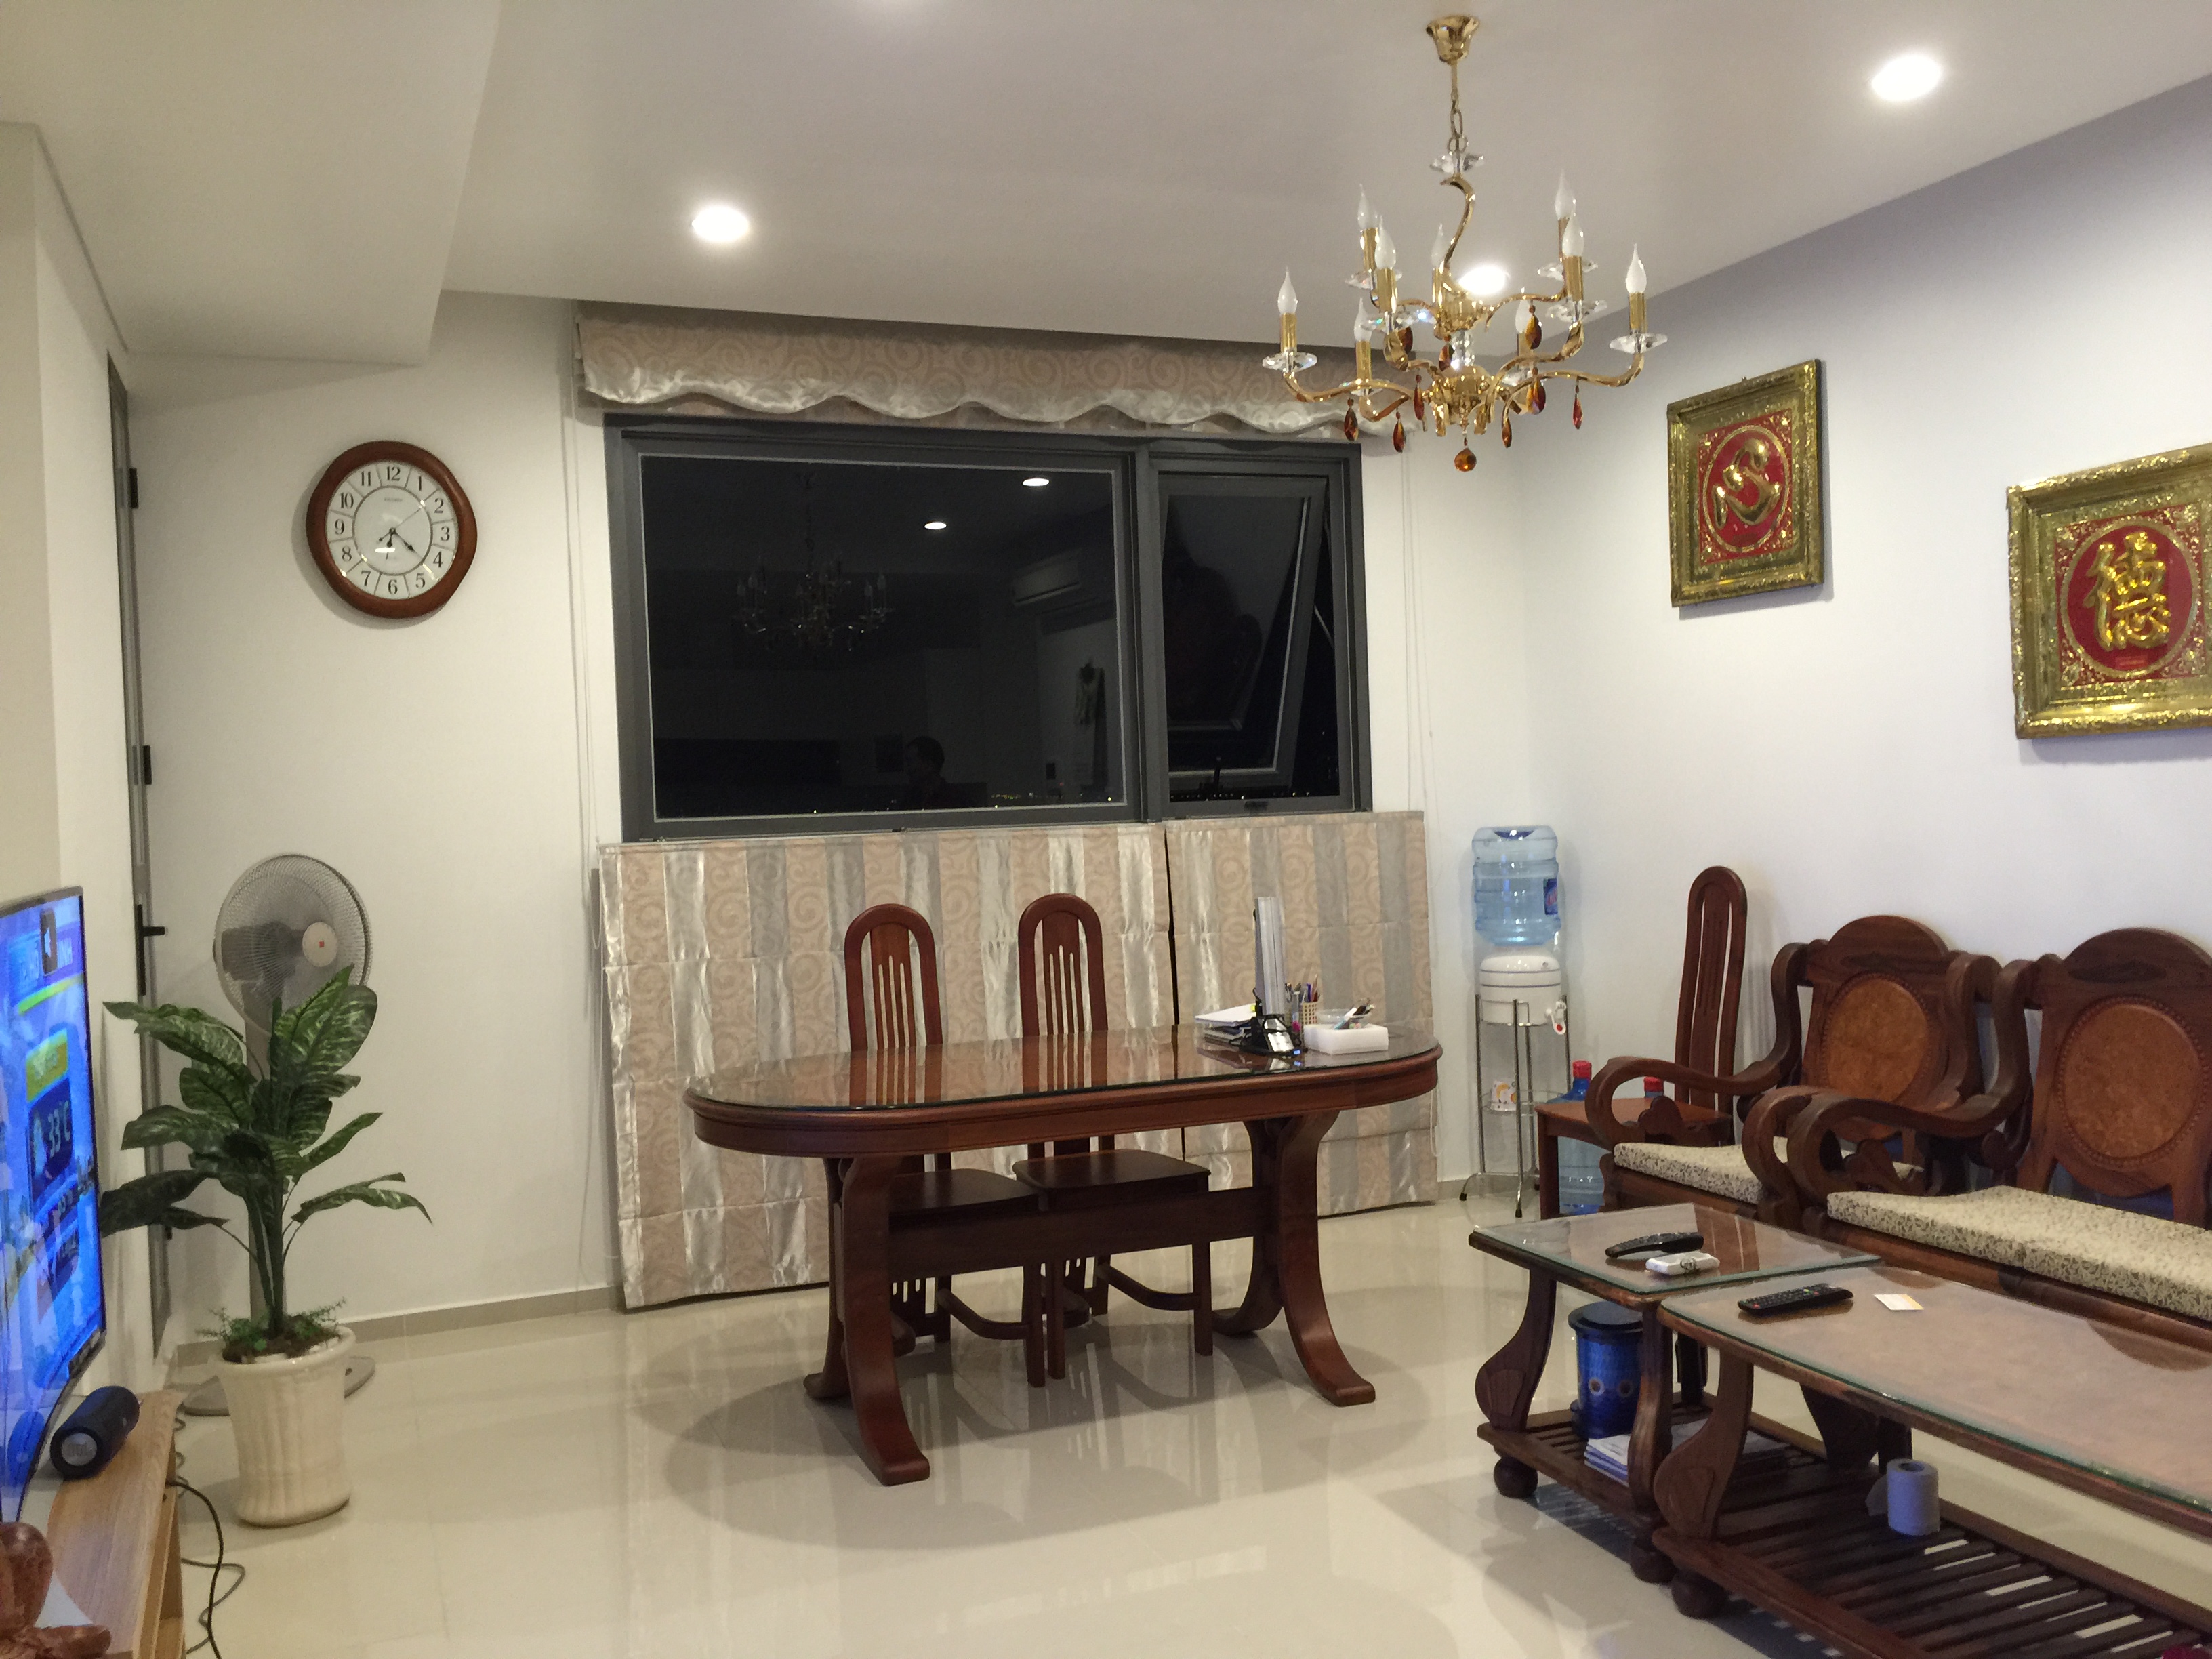 2 bedrooms, 1000 USD, Pearl Plaza apartment for rent